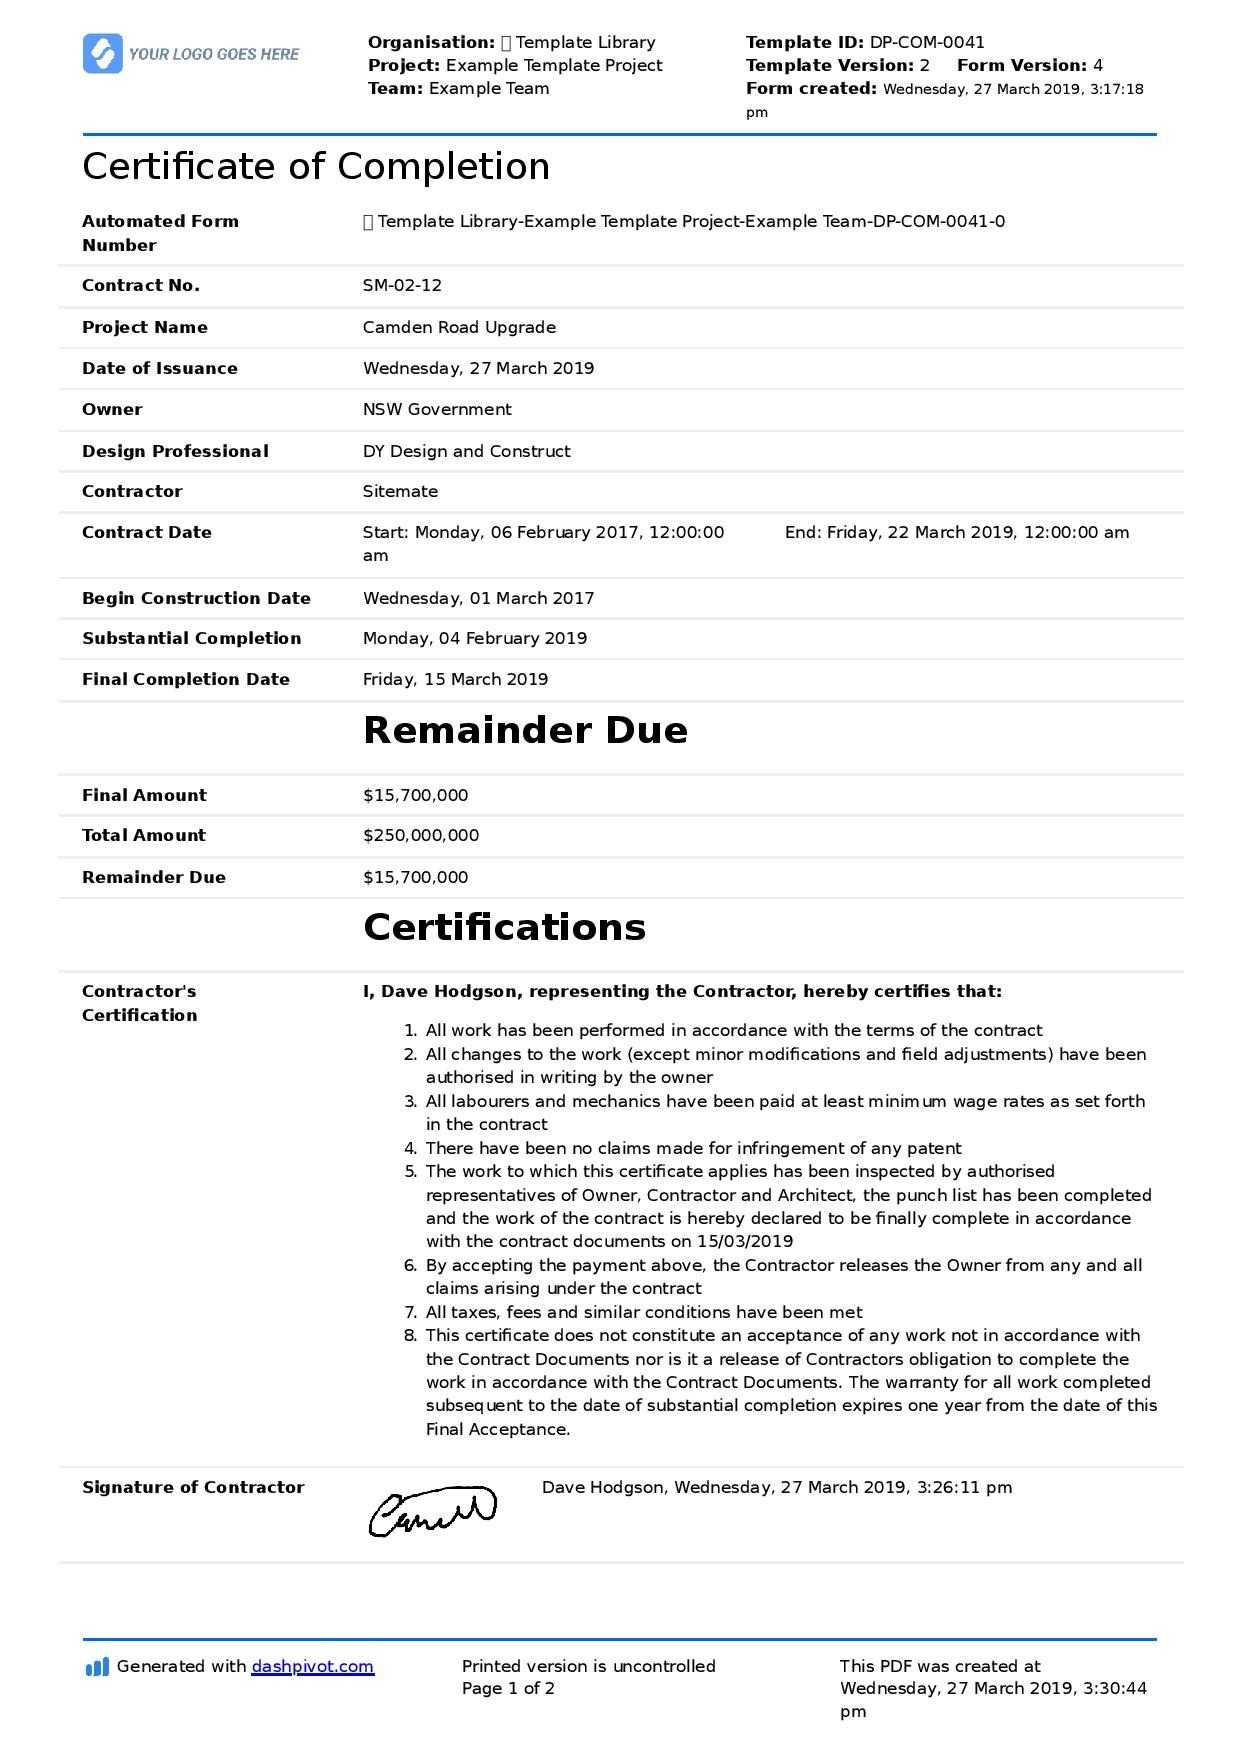 Certificate Of Completion For Construction (Free Template + Within Construction Payment Certificate Template